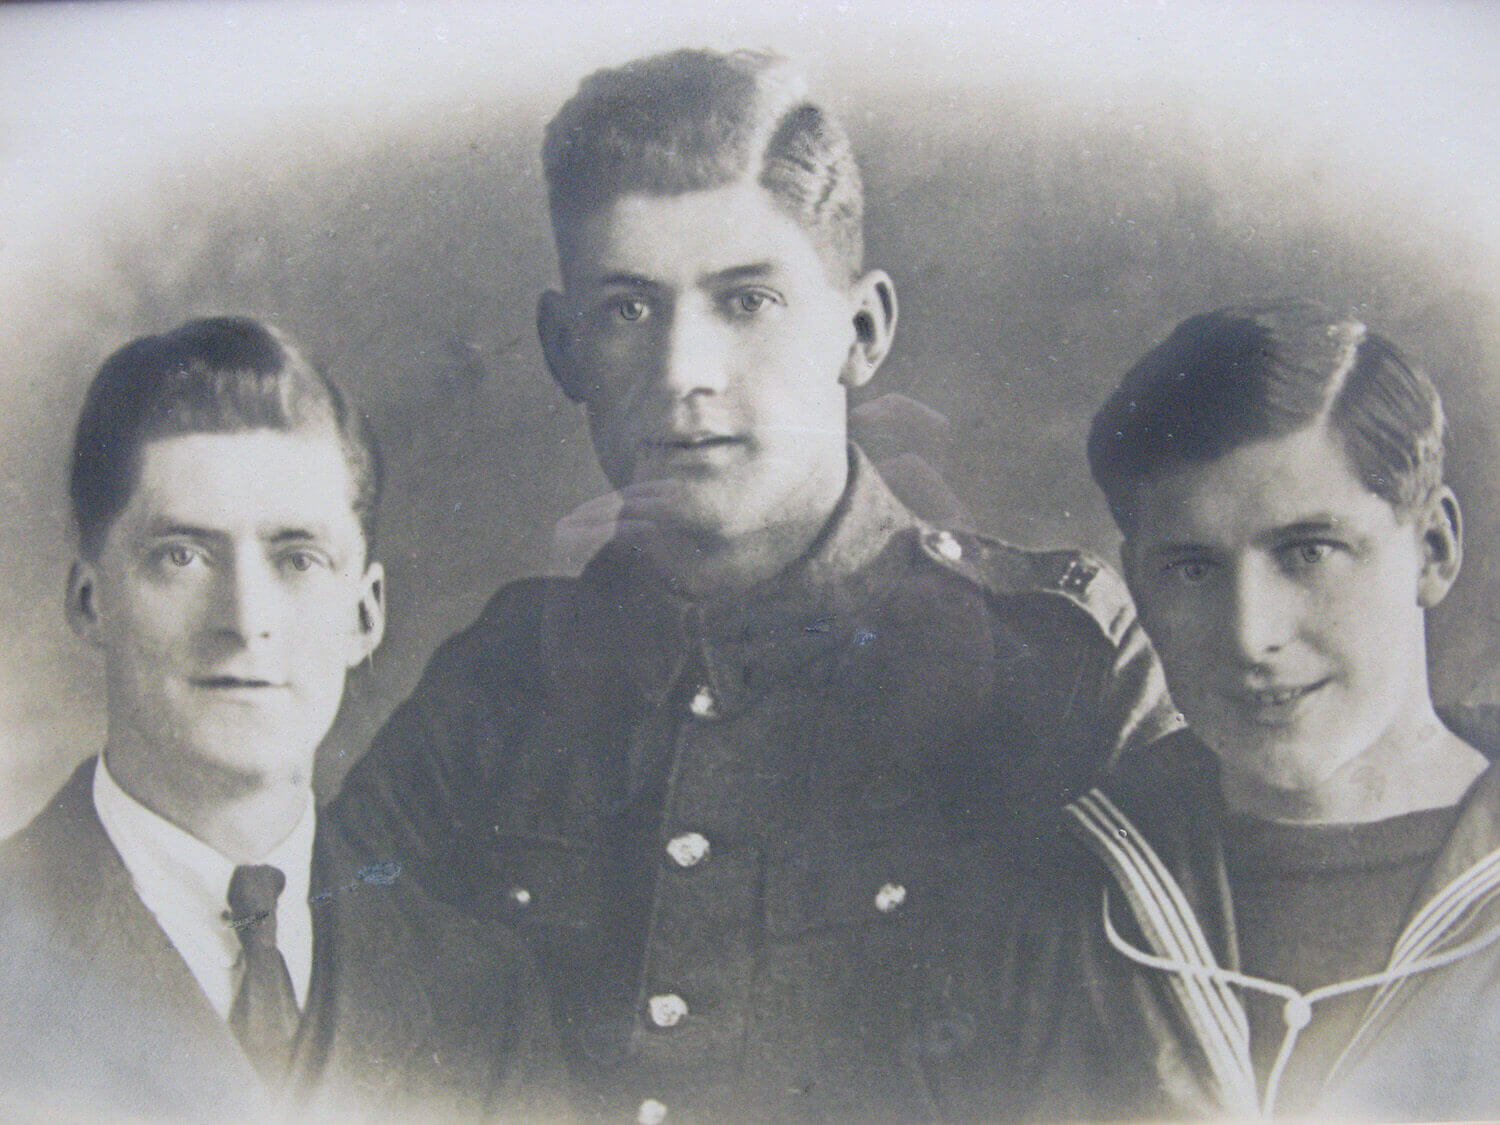 Harry, Ray and Phil Cavanna in RAF, Army and Royal Navy uniforms at the end of the Great War in 1918